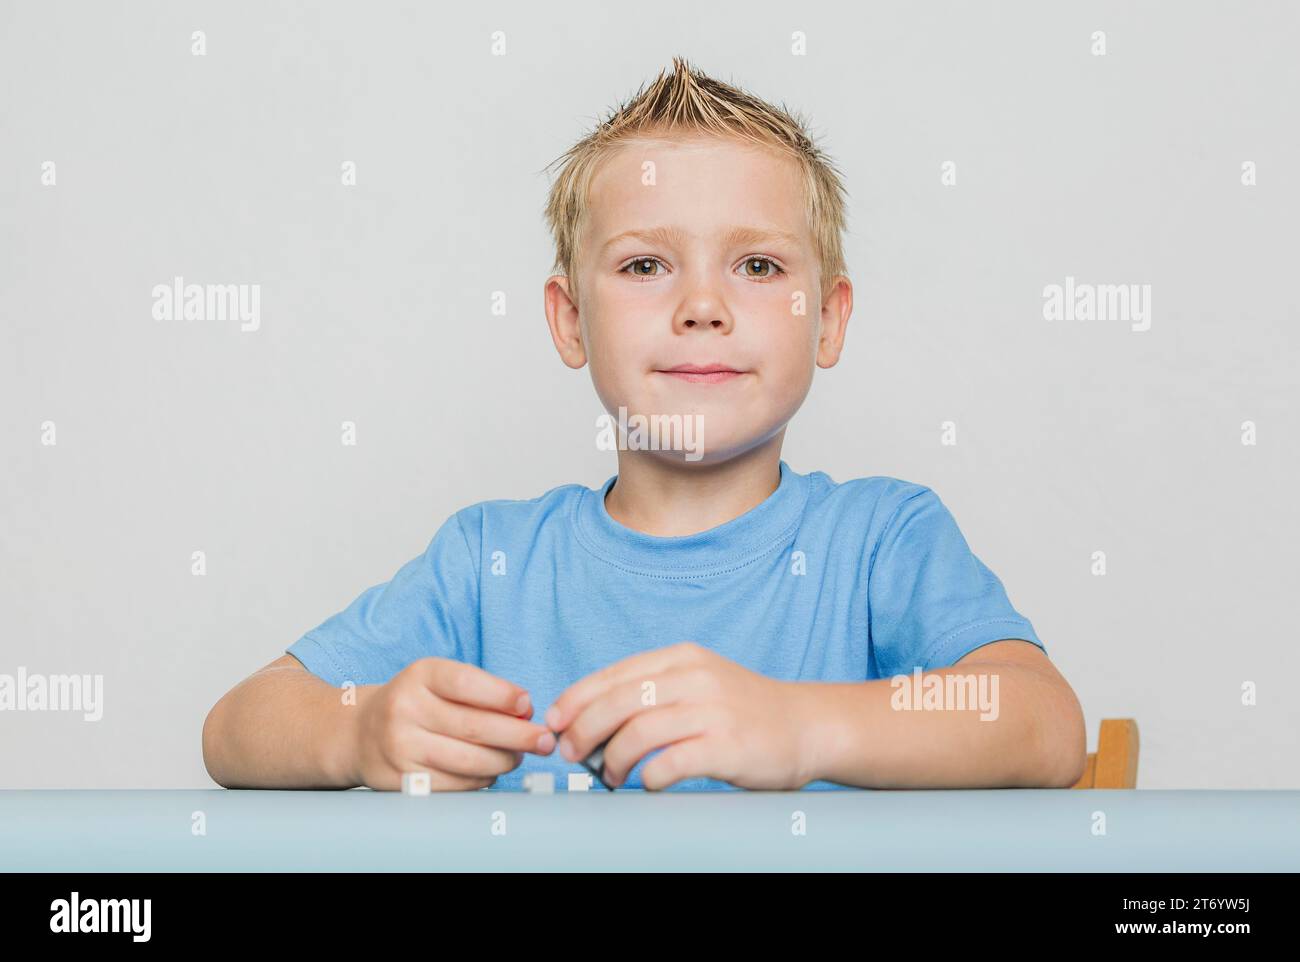 Portrait cute kid with blonde hair Stock Photo